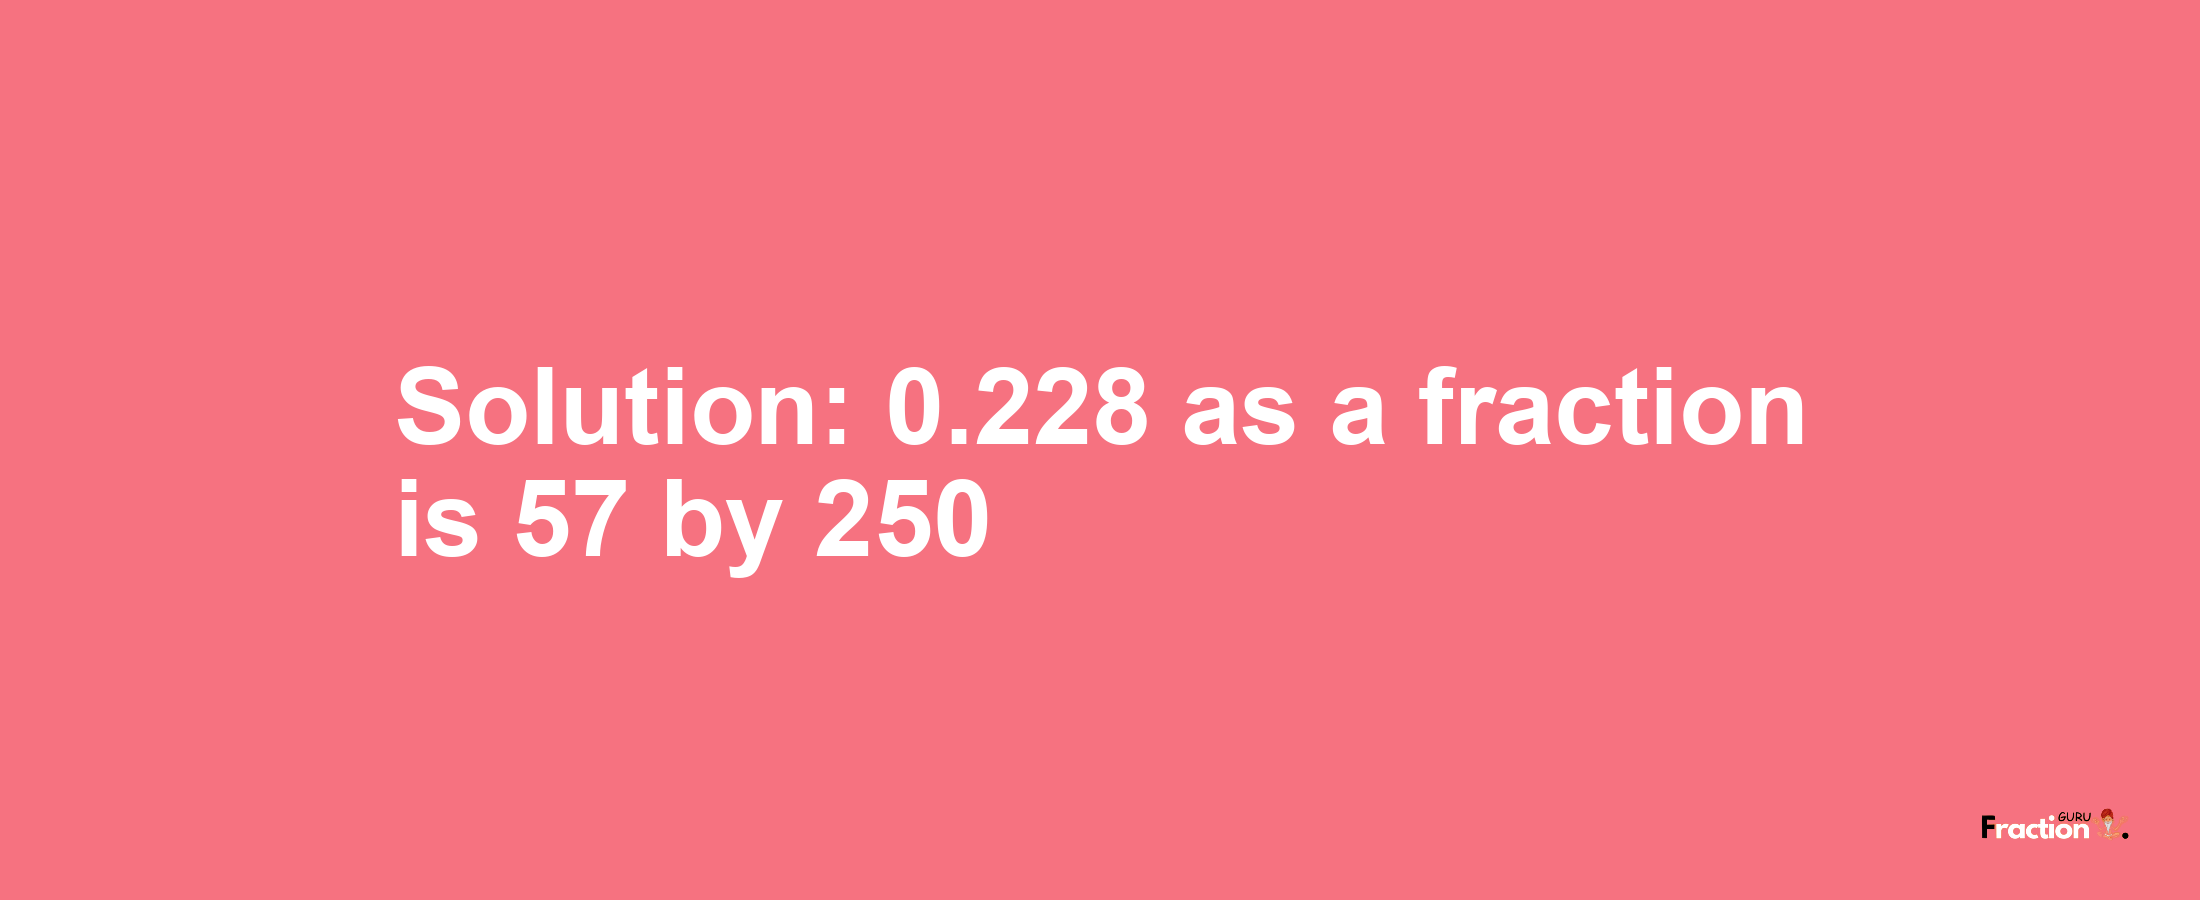 Solution:0.228 as a fraction is 57/250